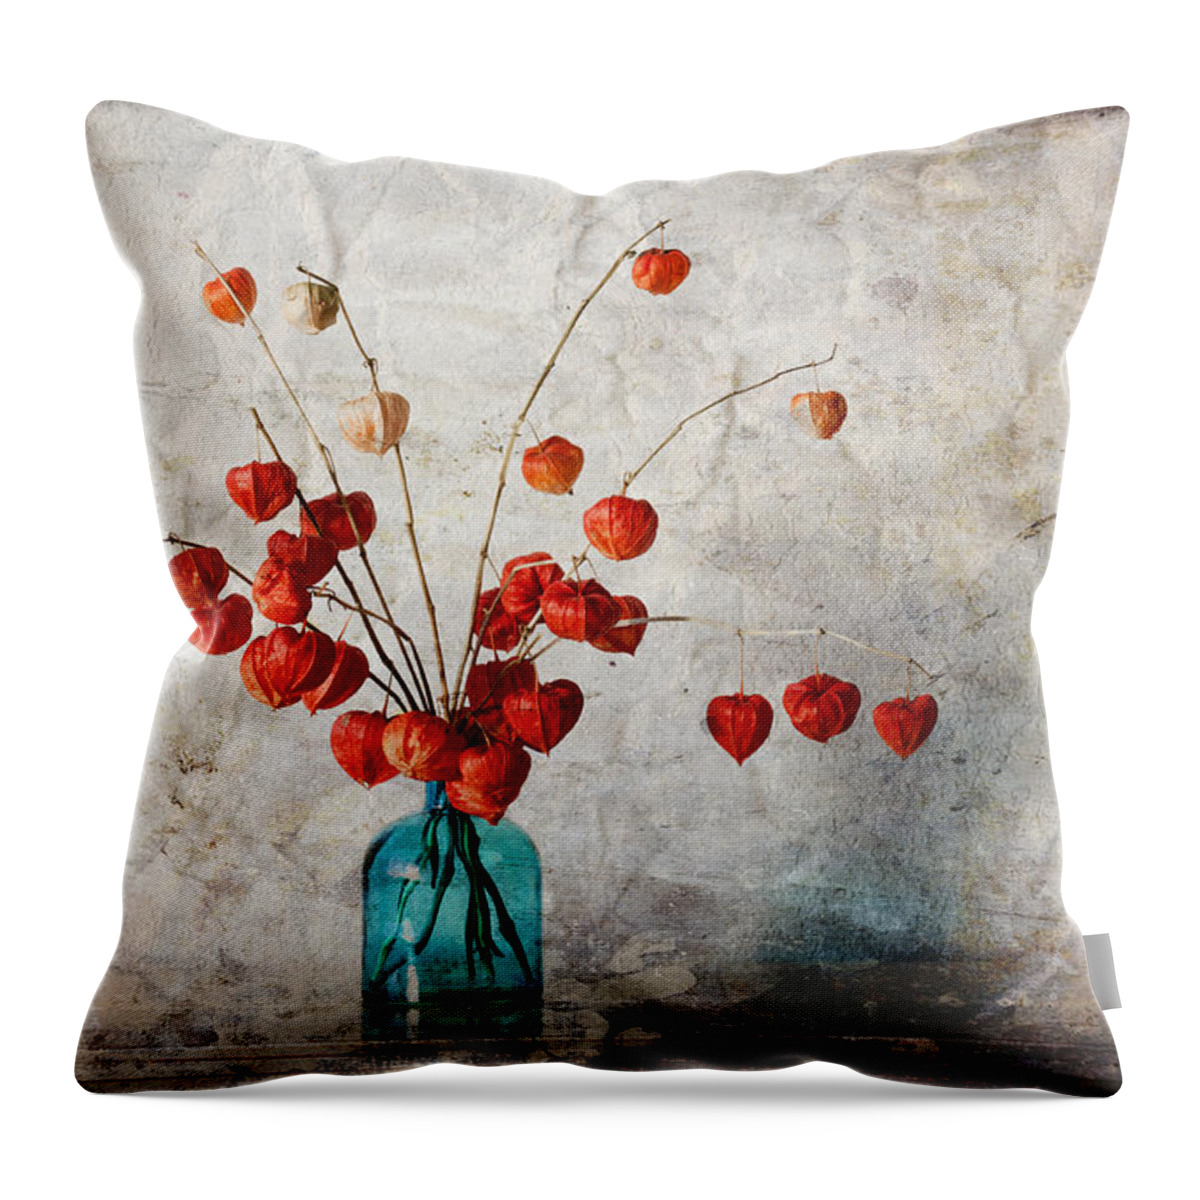 Chinese Throw Pillow featuring the photograph Chinese Lanterns by Carol Leigh